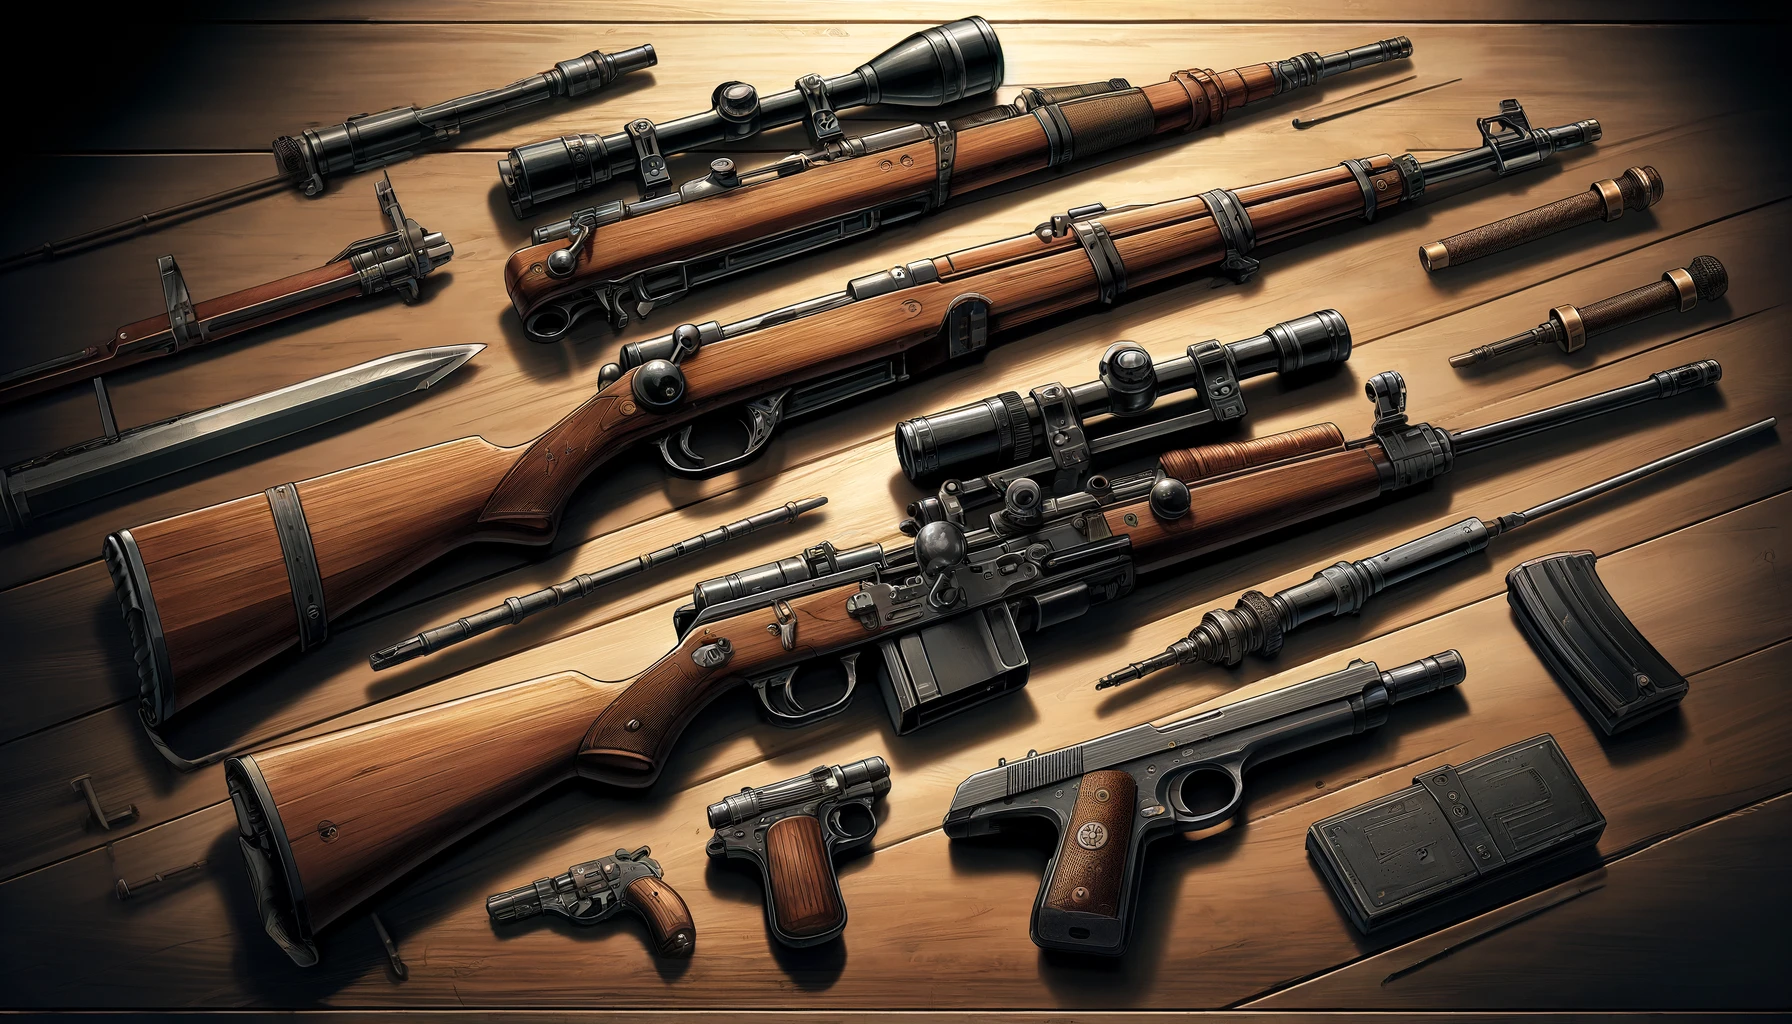 A collection of detailed anime-style firearms used by a male character in a historical setting, displayed against a rustic wooden background. The collection includes a bolt-action rifle, a sniper rifle with a scope, and a compact pistol. The guns are laid out in an organized manner, showcasing their distinctive features and mechanical details. The scene conveys a sense of rugged practicality and historical accuracy, suitable for a character skilled in weaponry from an early 20th century context. The image is in a 16:9 aspect ratio.